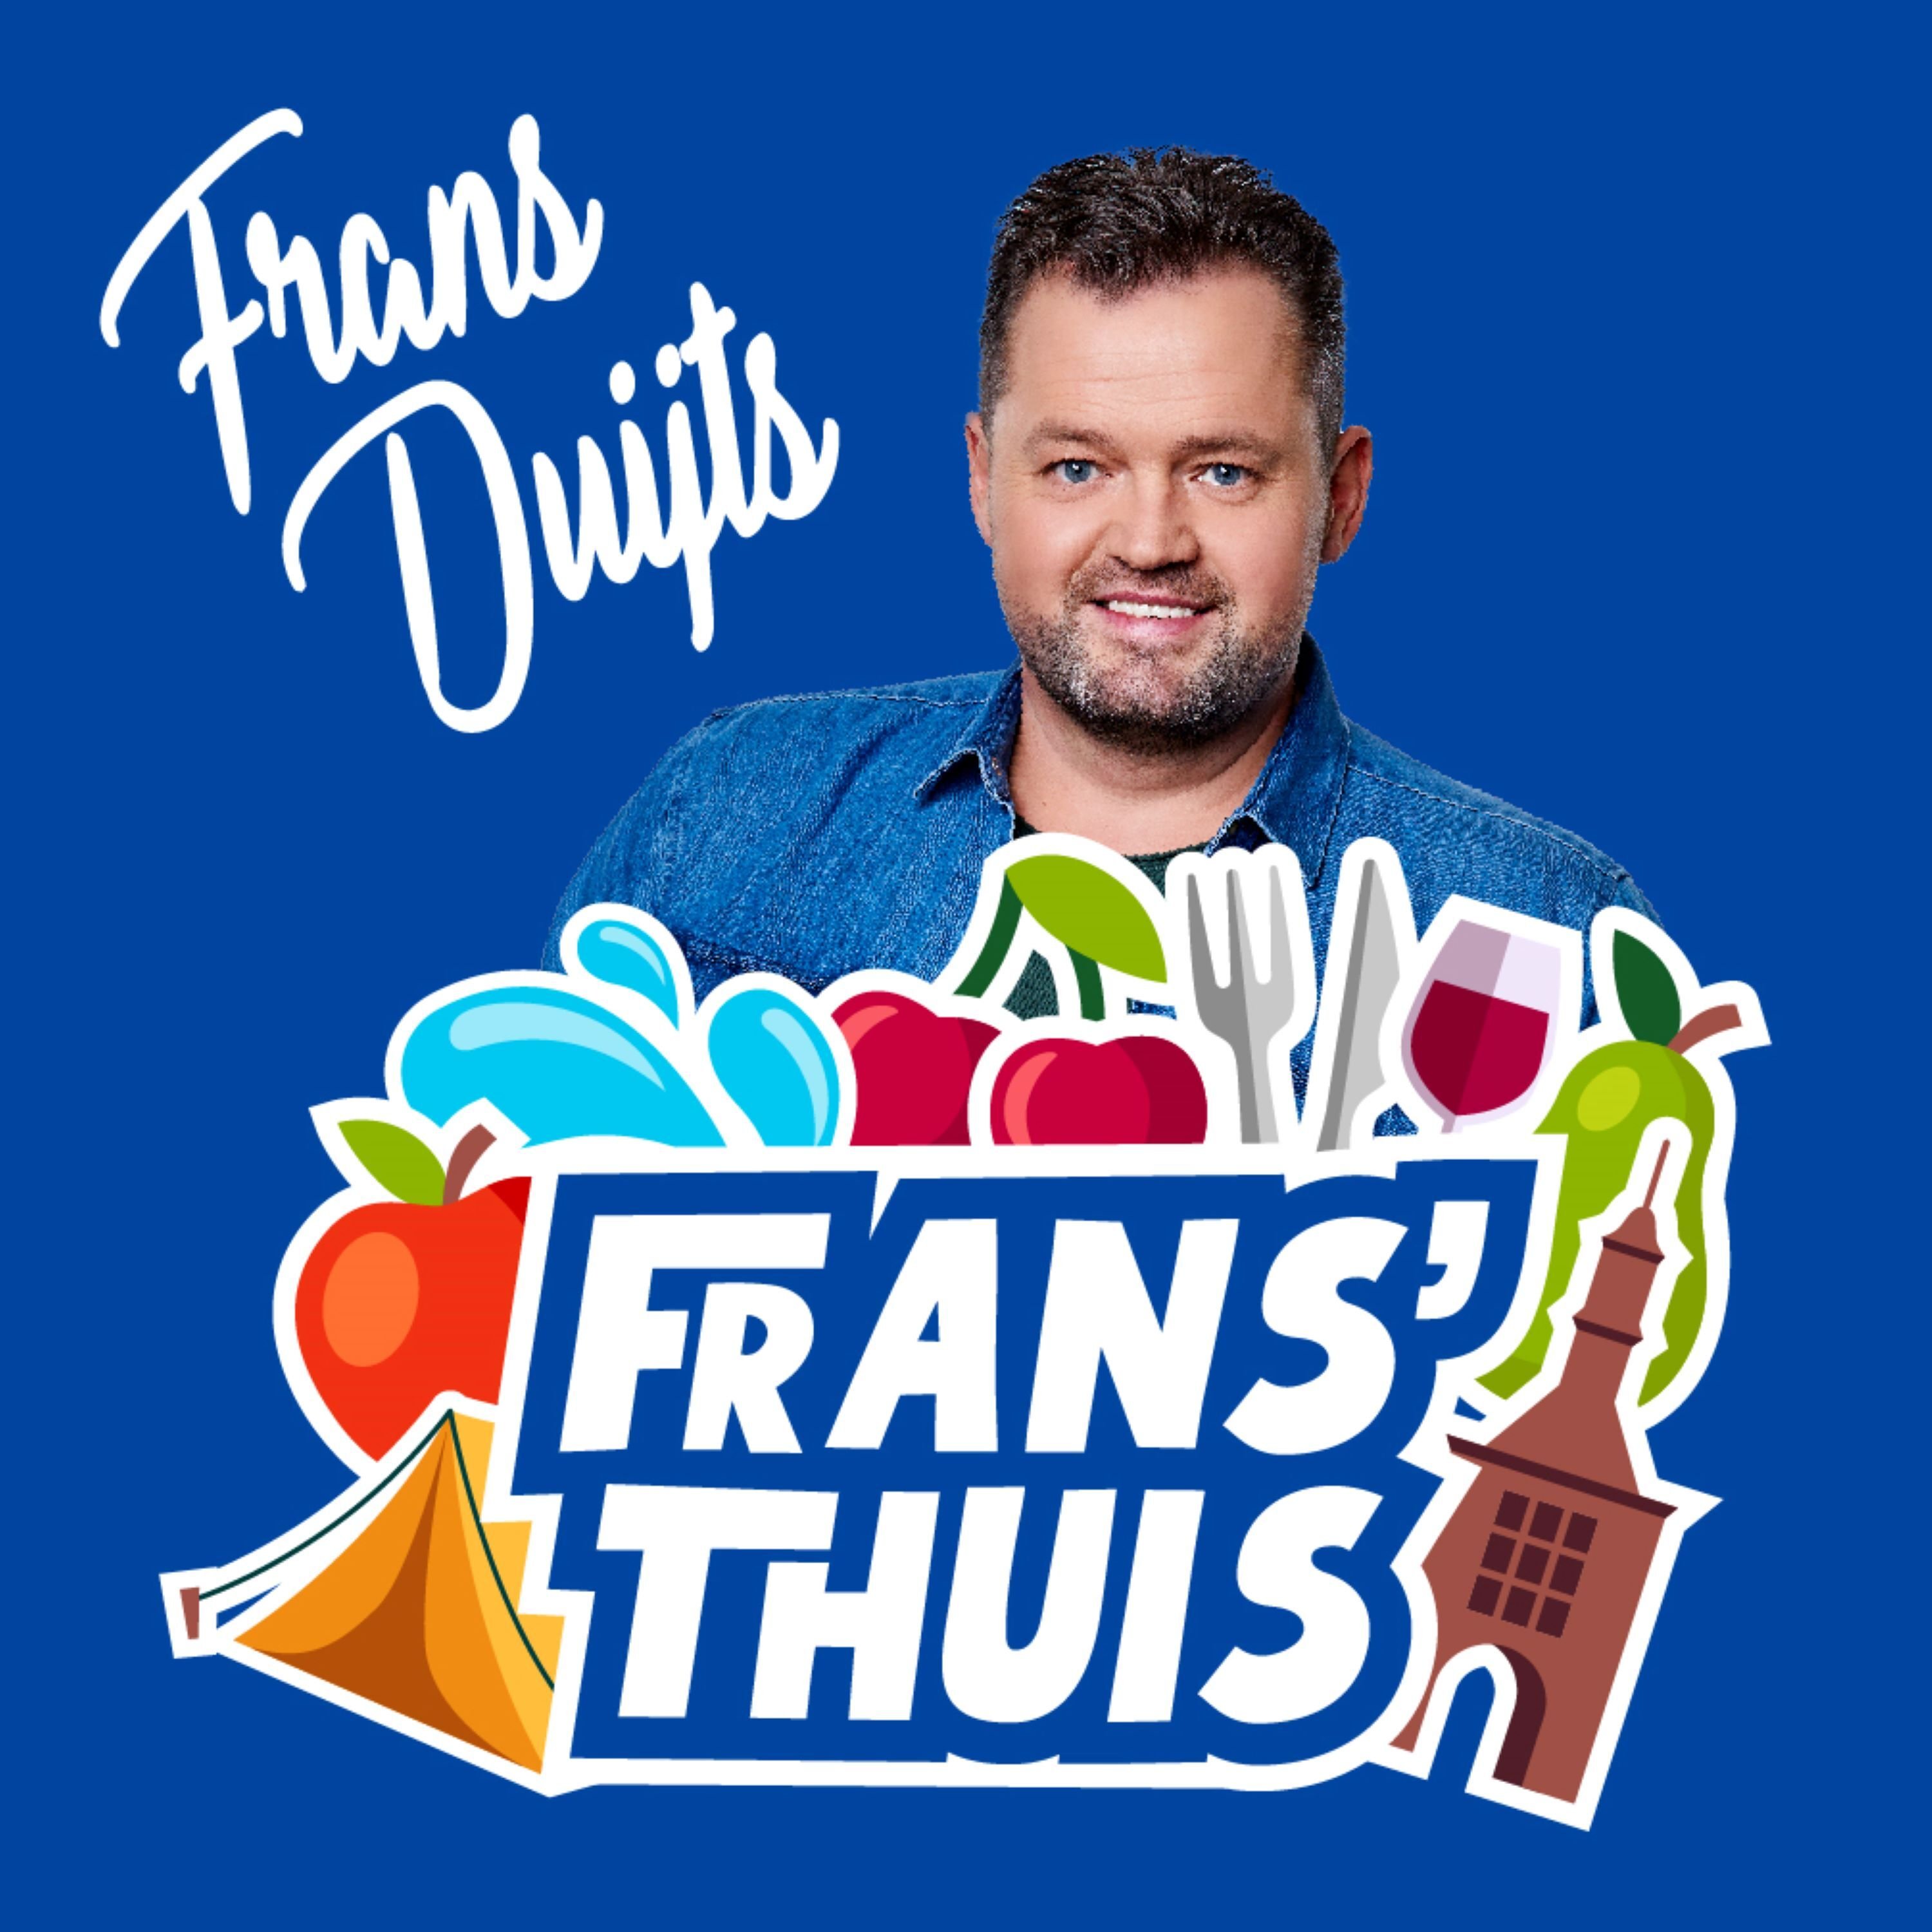 Frans thuis